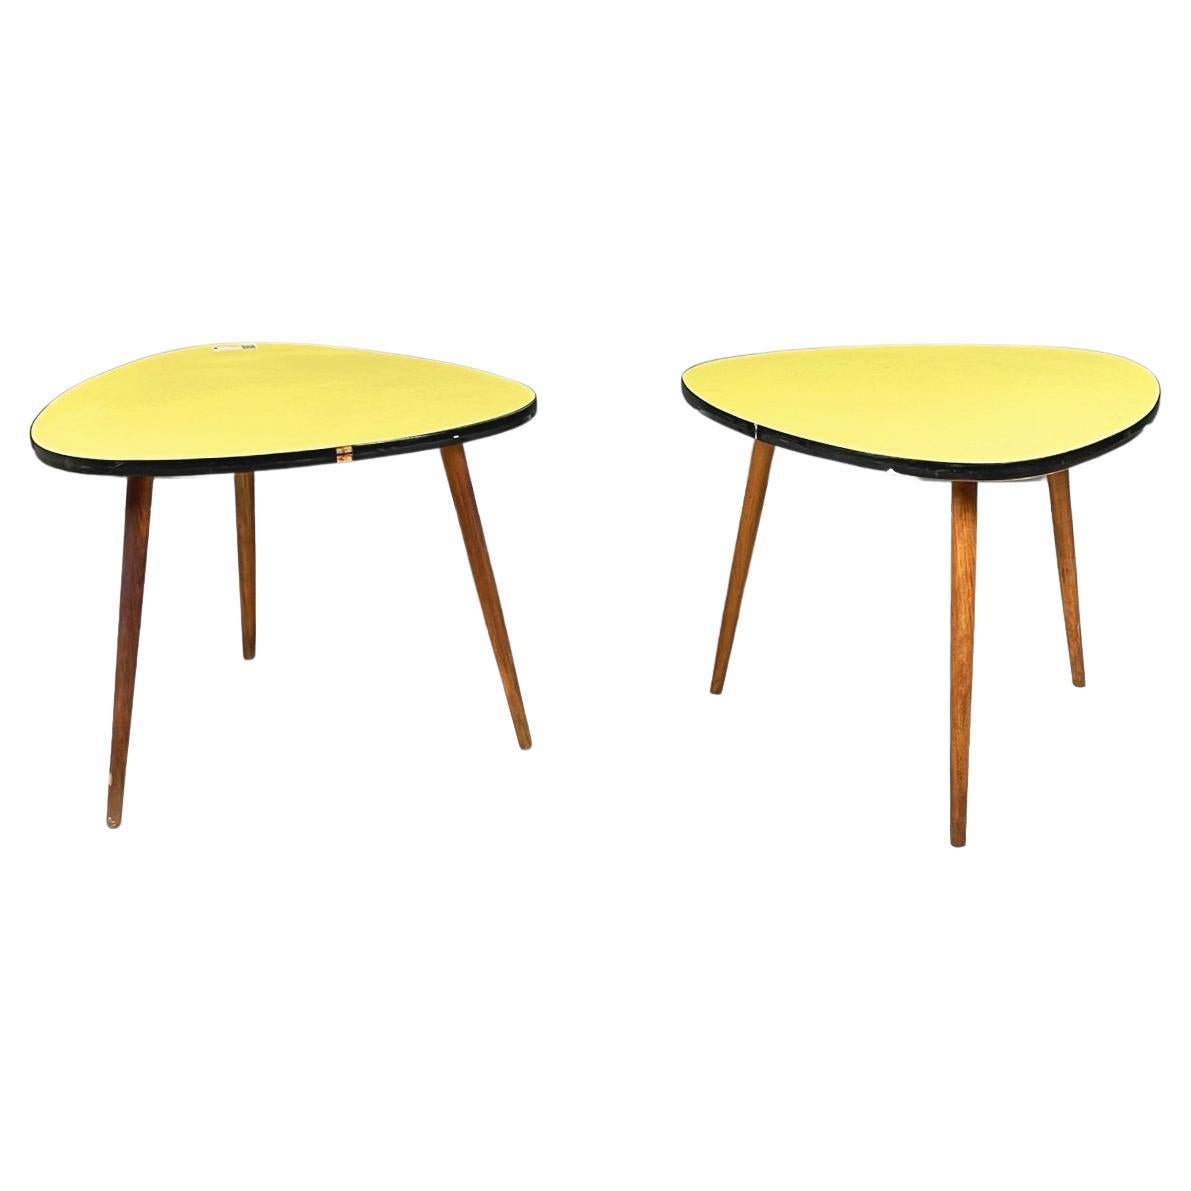 Northern European Midcentury Wood Yellow and Black Formica Coffee Tables, 1960s